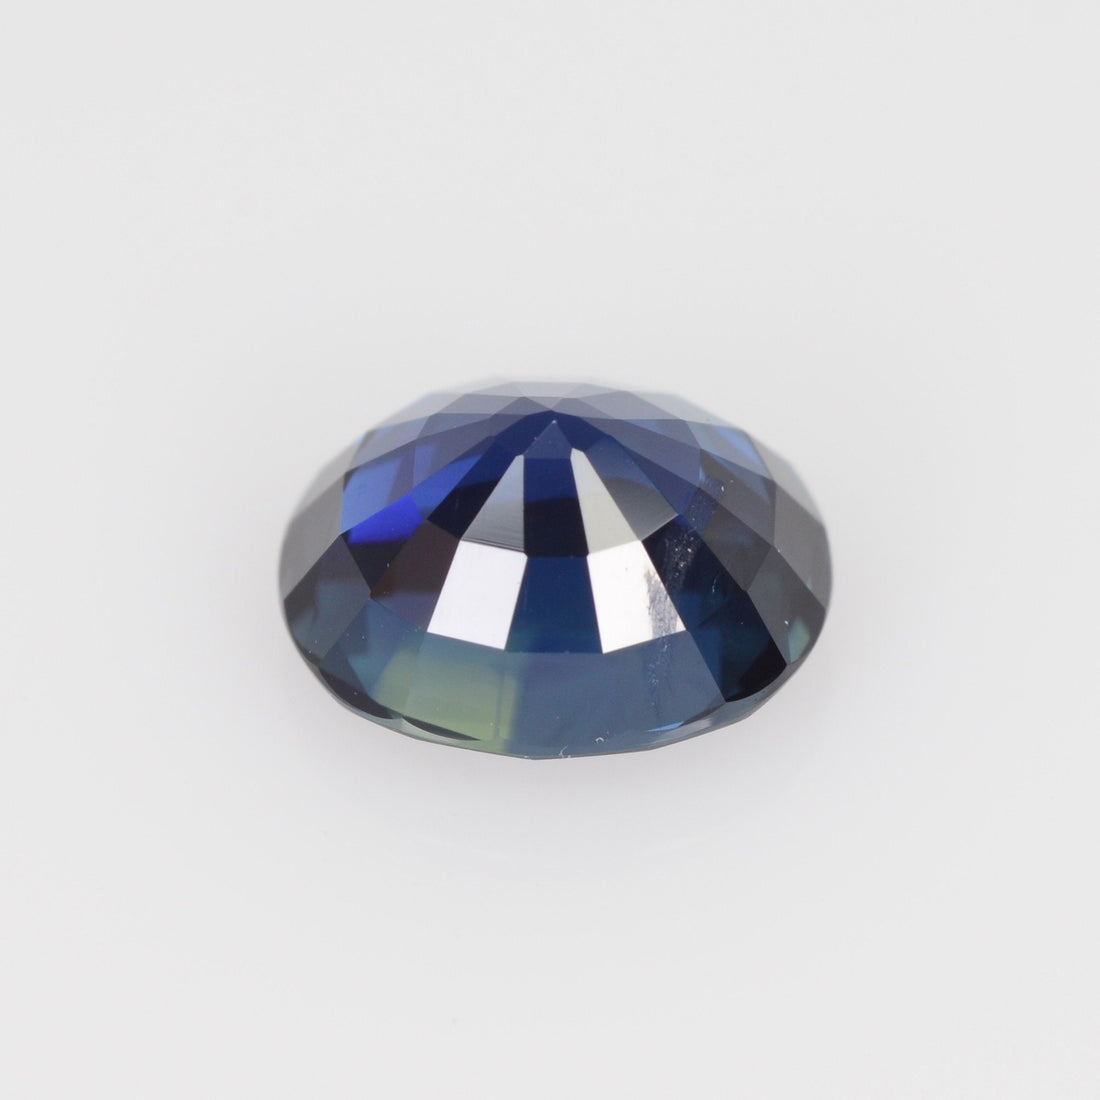 1.91 cts Natural Blue Sapphire Loose Gemstone Oval Cut